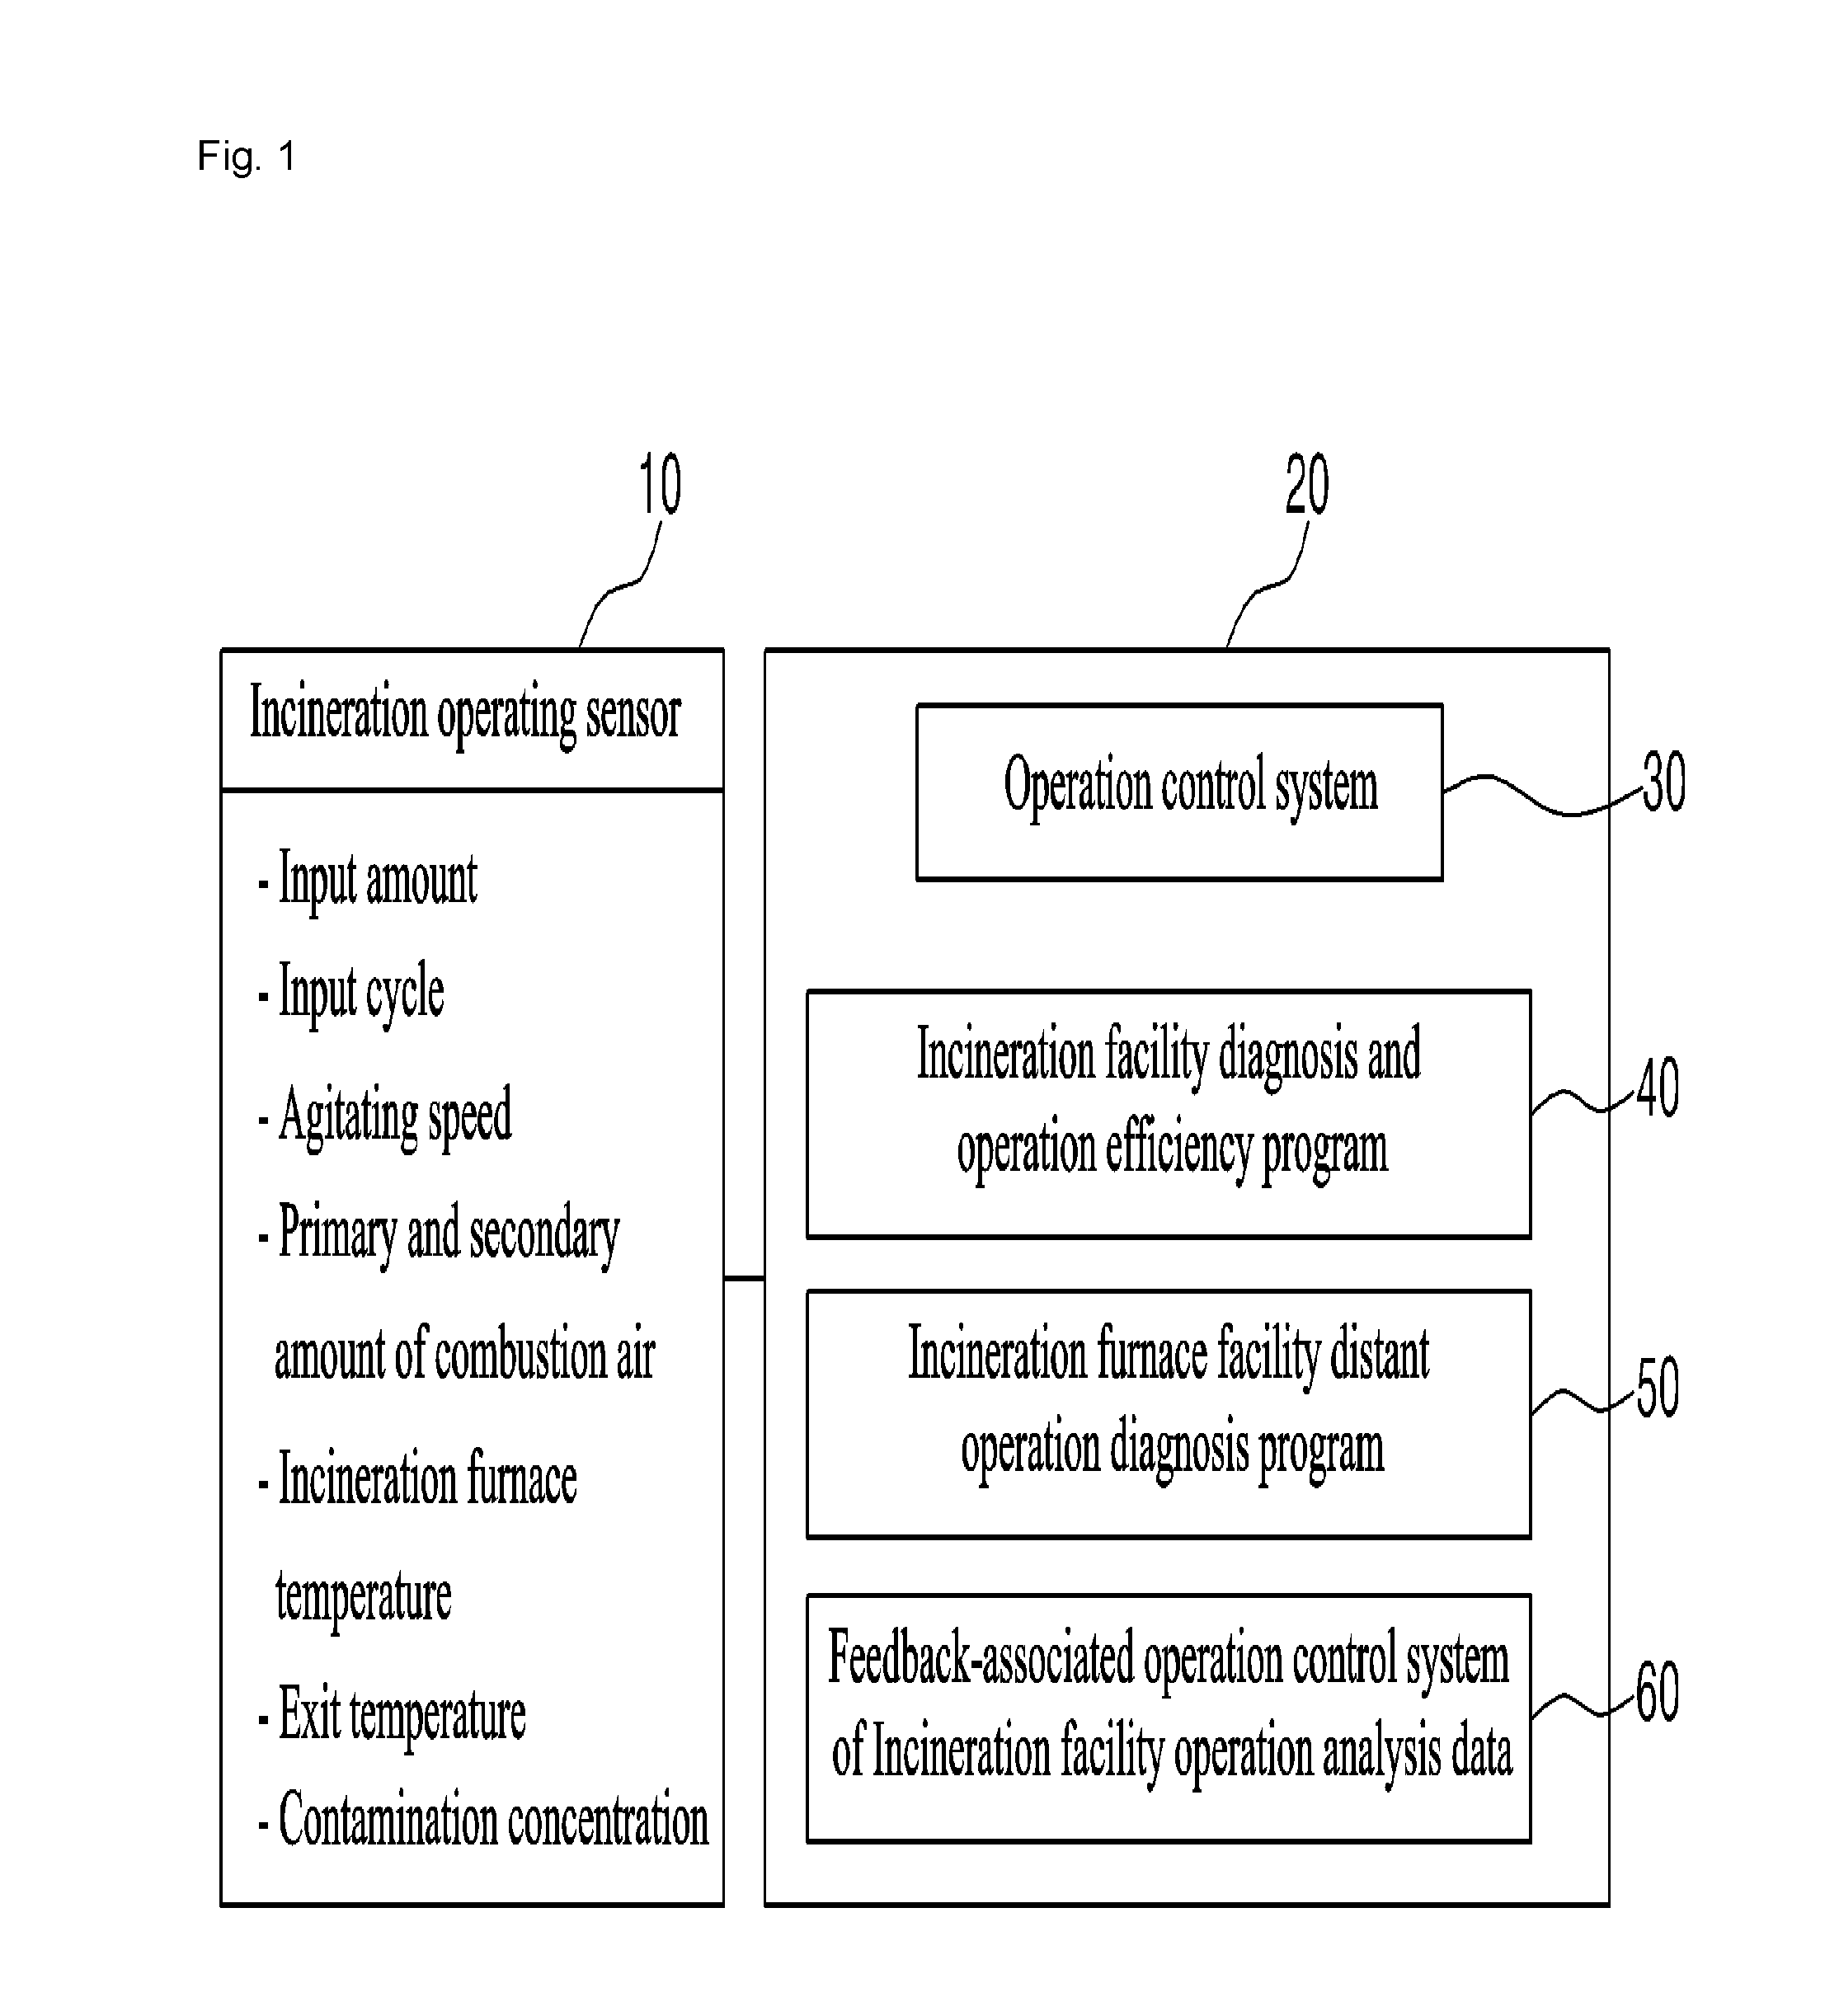 System and method for diagnosing and controlling incineration facility and solid fuel boiler and managing life cycle of facility through heat exchange and design program and operation mode analysis of operator